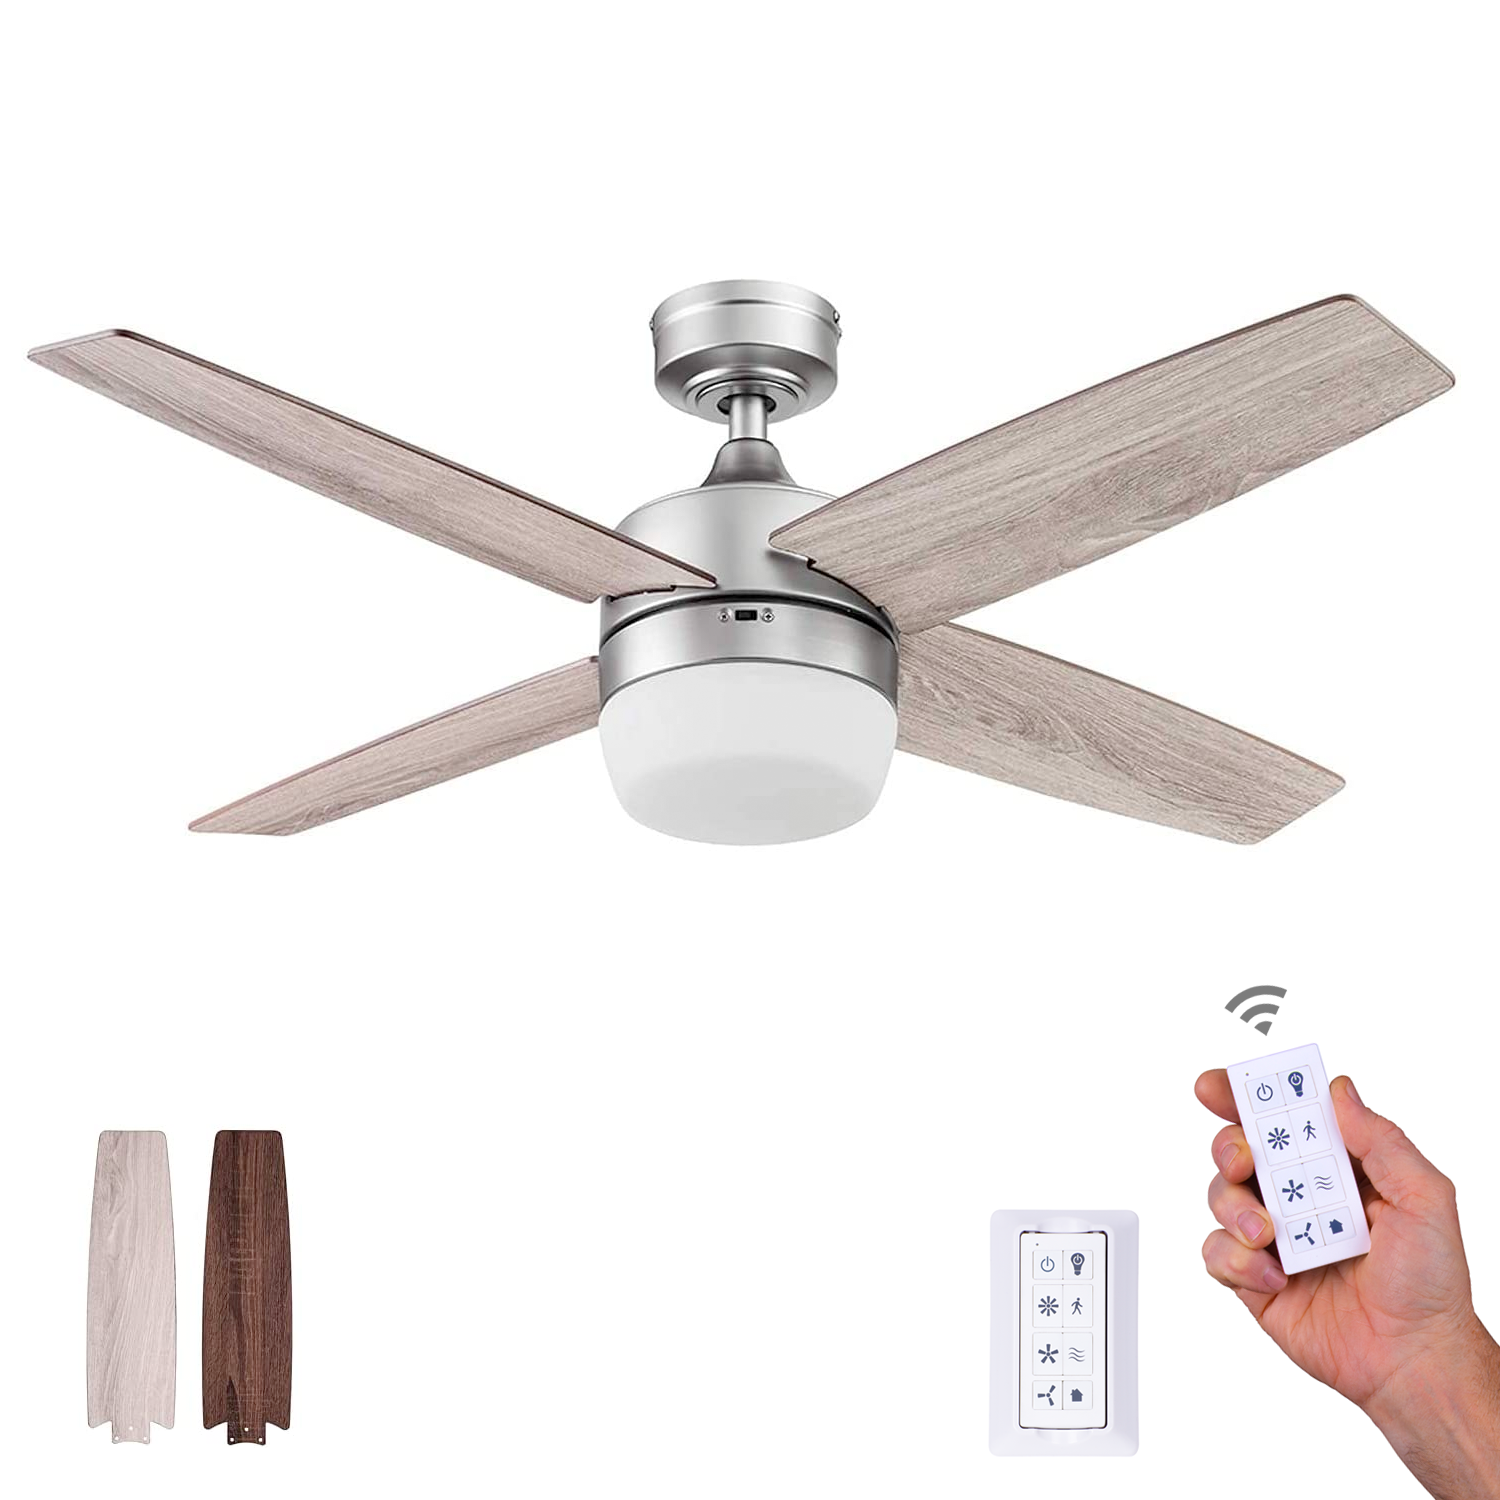 44 Inch Atlas, Pewter, Remote Control, Ceiling Fan by Prominence Home